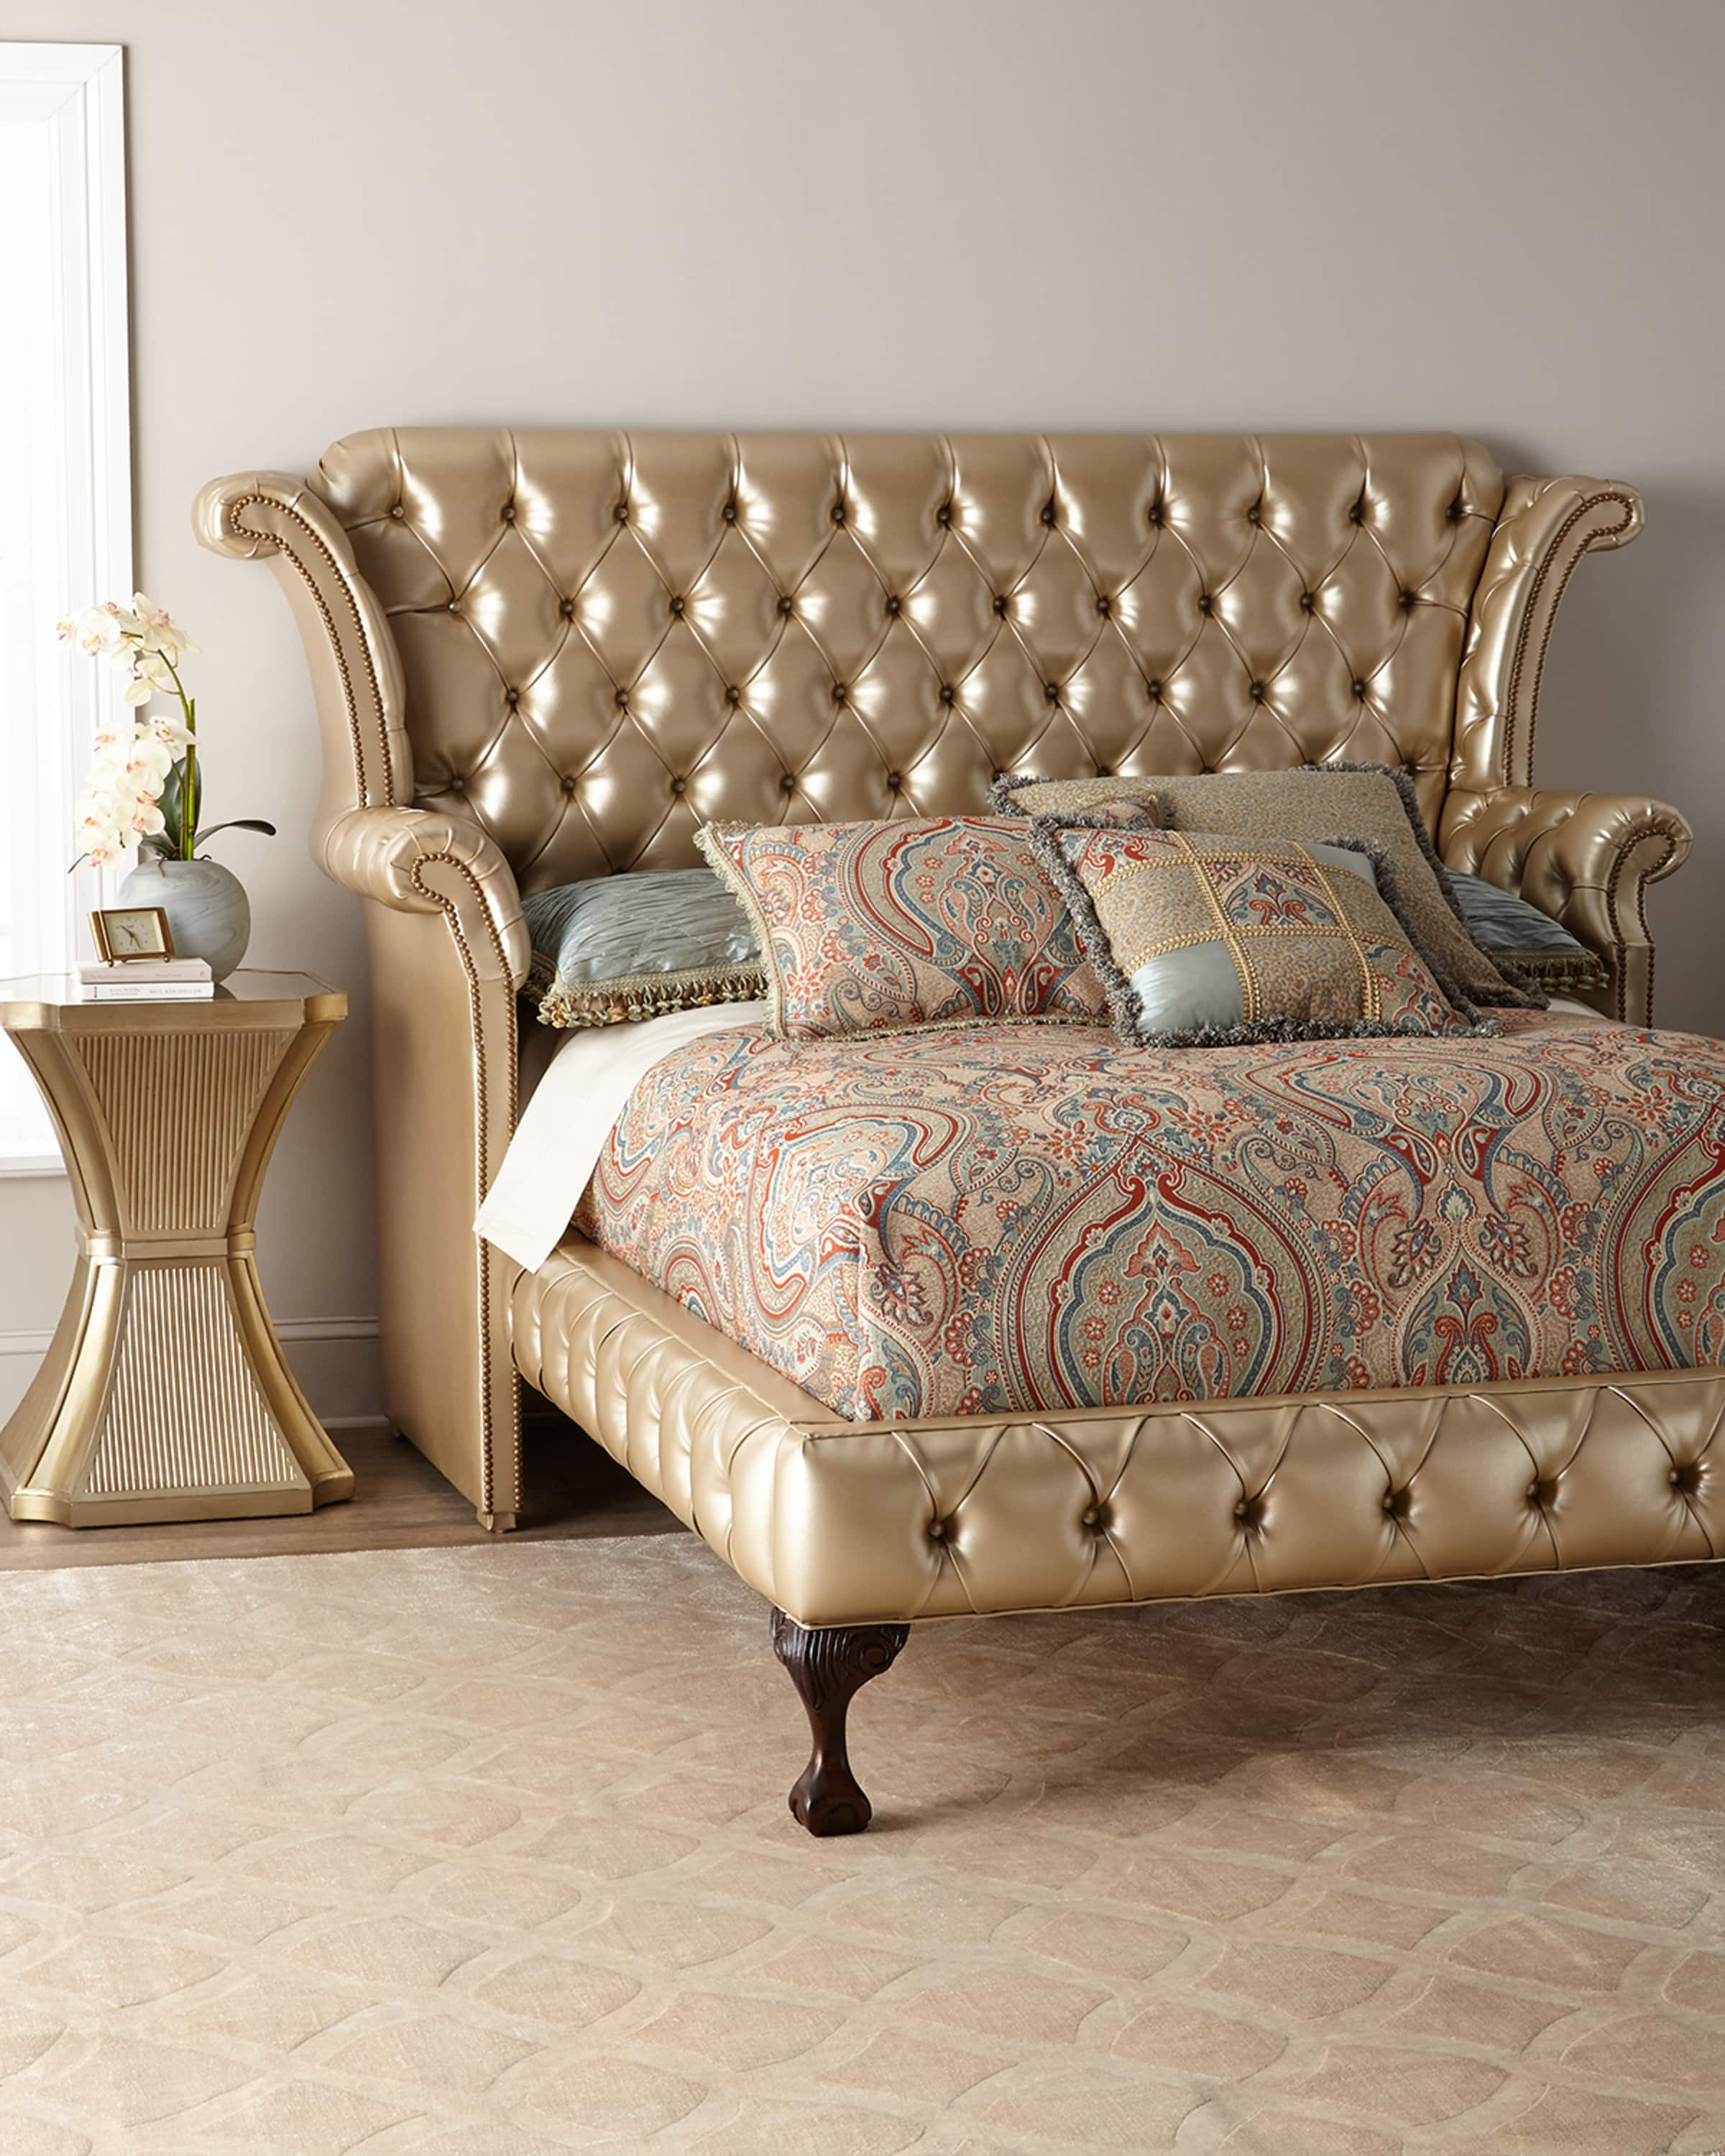 Haute House Champagne Carter King Bed